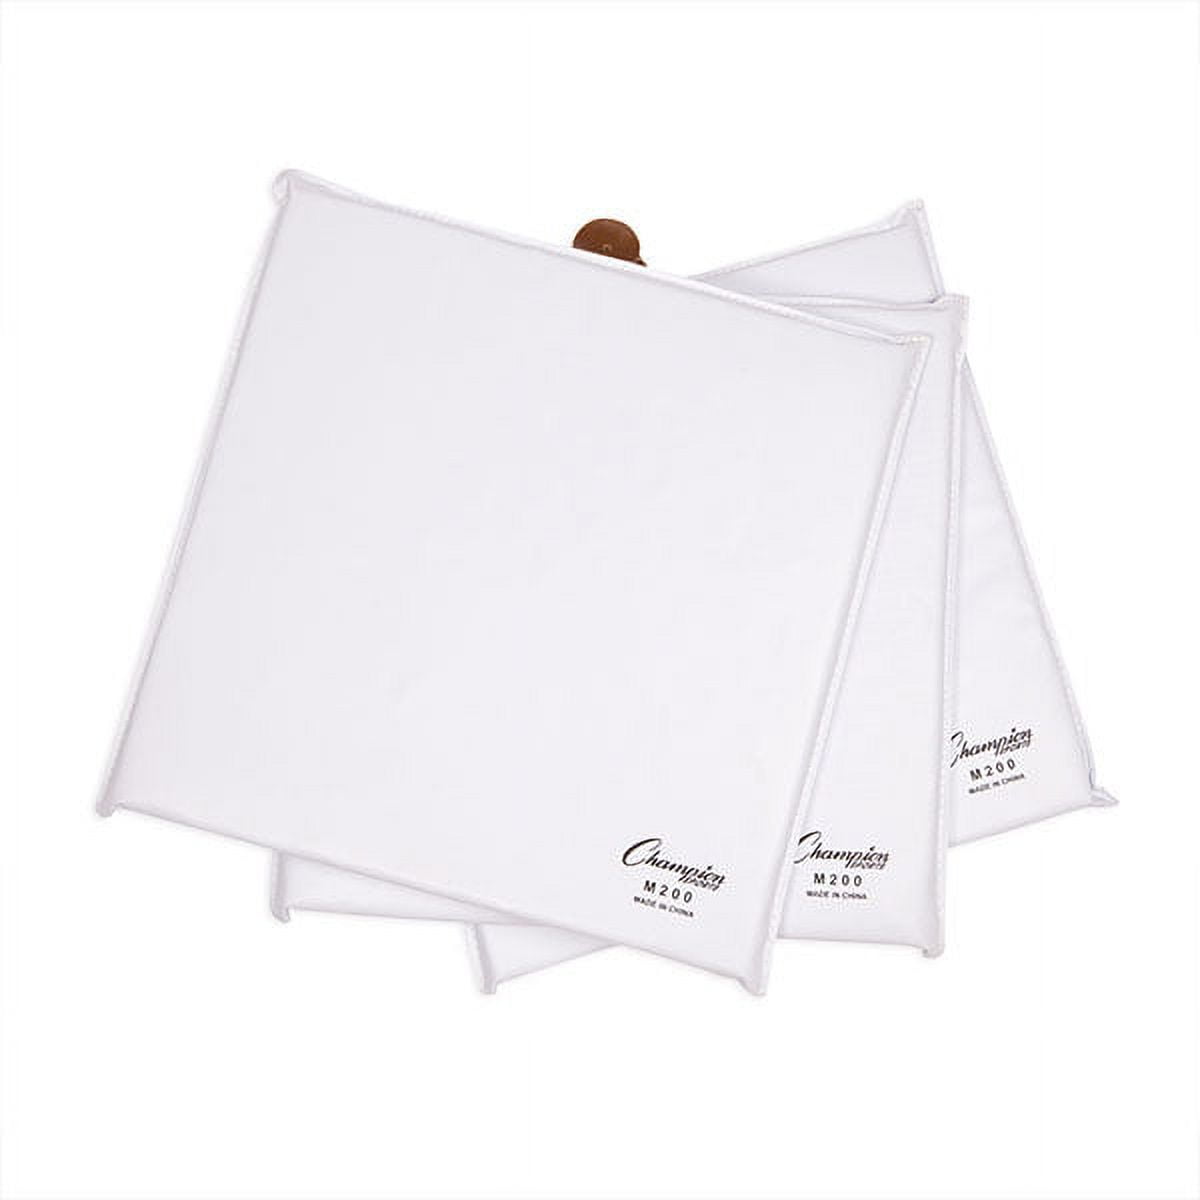 Picture of Champion Sports M200 Foam Filled Quilted Cover Base Set, White - Set of 3